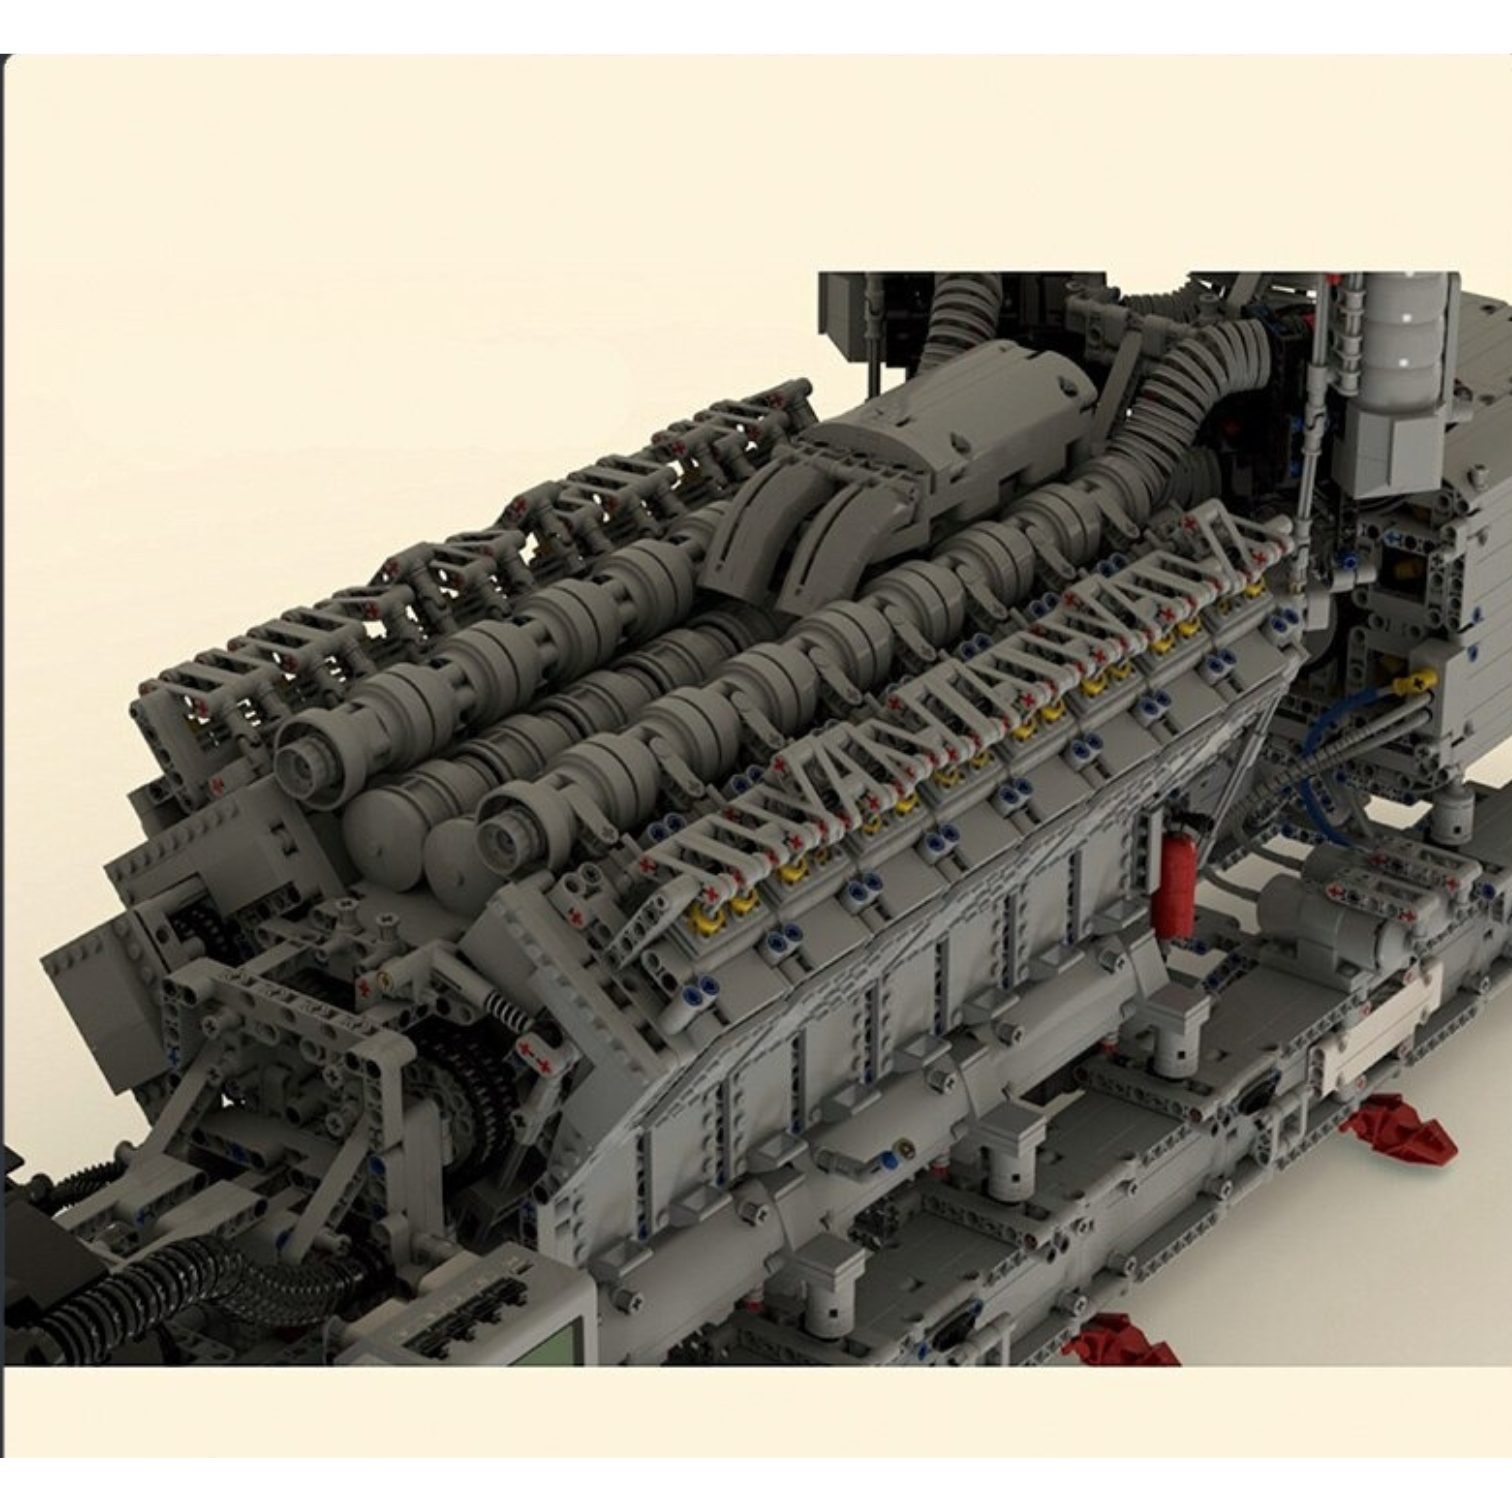 Emergency V16 Diesel Generator MOC-71783 Technic With 8144 Pieces